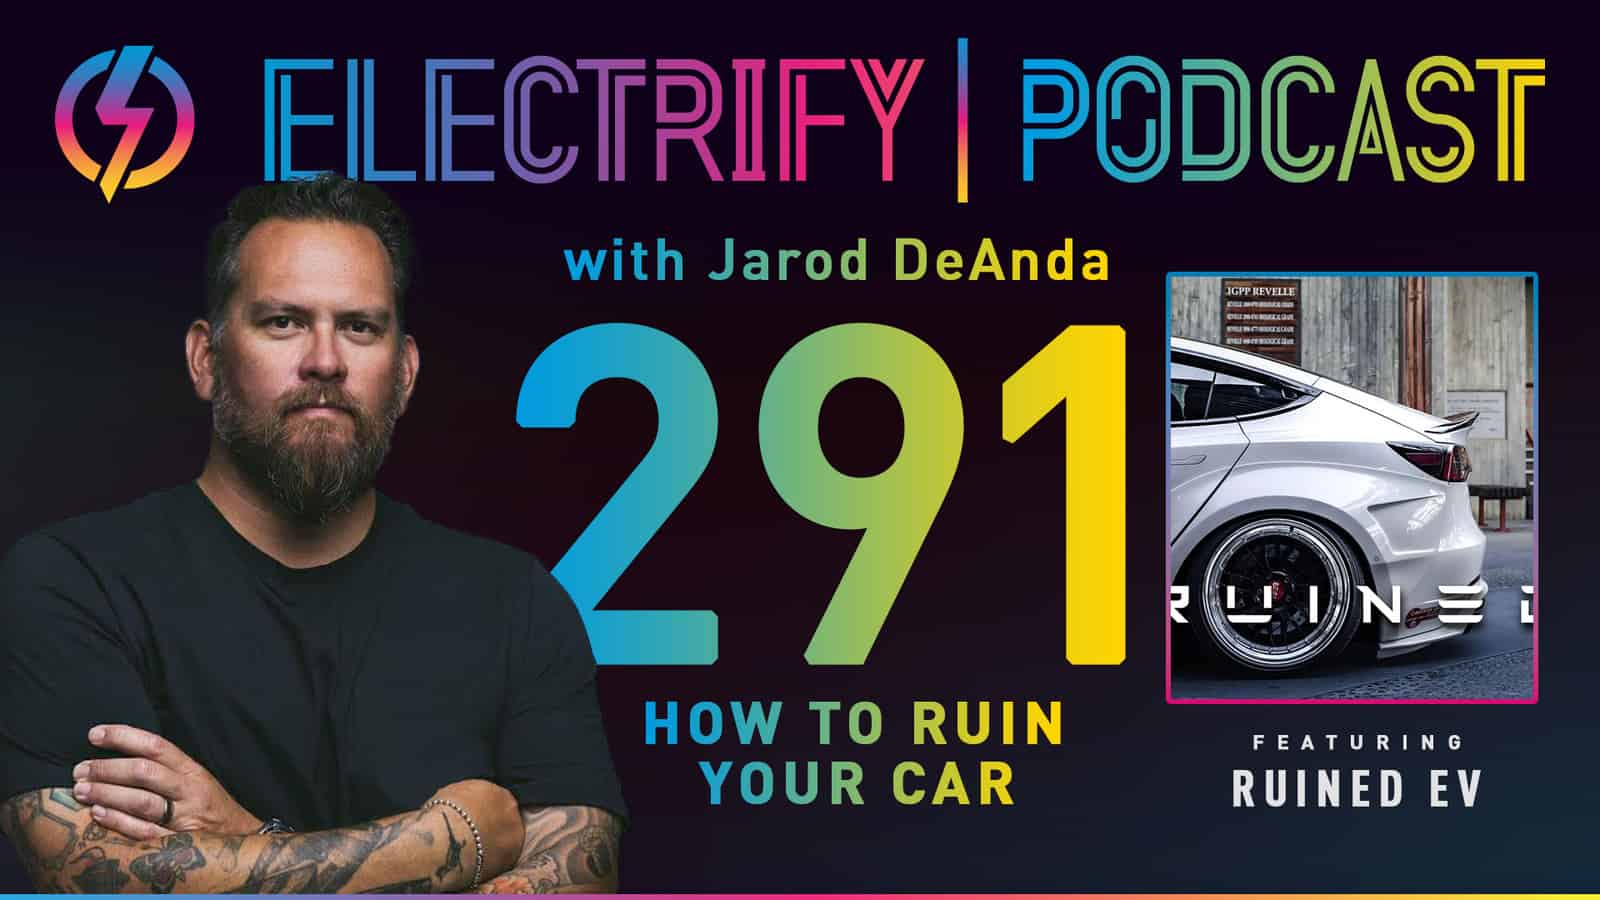 Image showcasing Electrify Podcast episode 291 with host Jarod DeAnda featuring guests AJ Velasco and CJ Cardinalli of Ruined EV